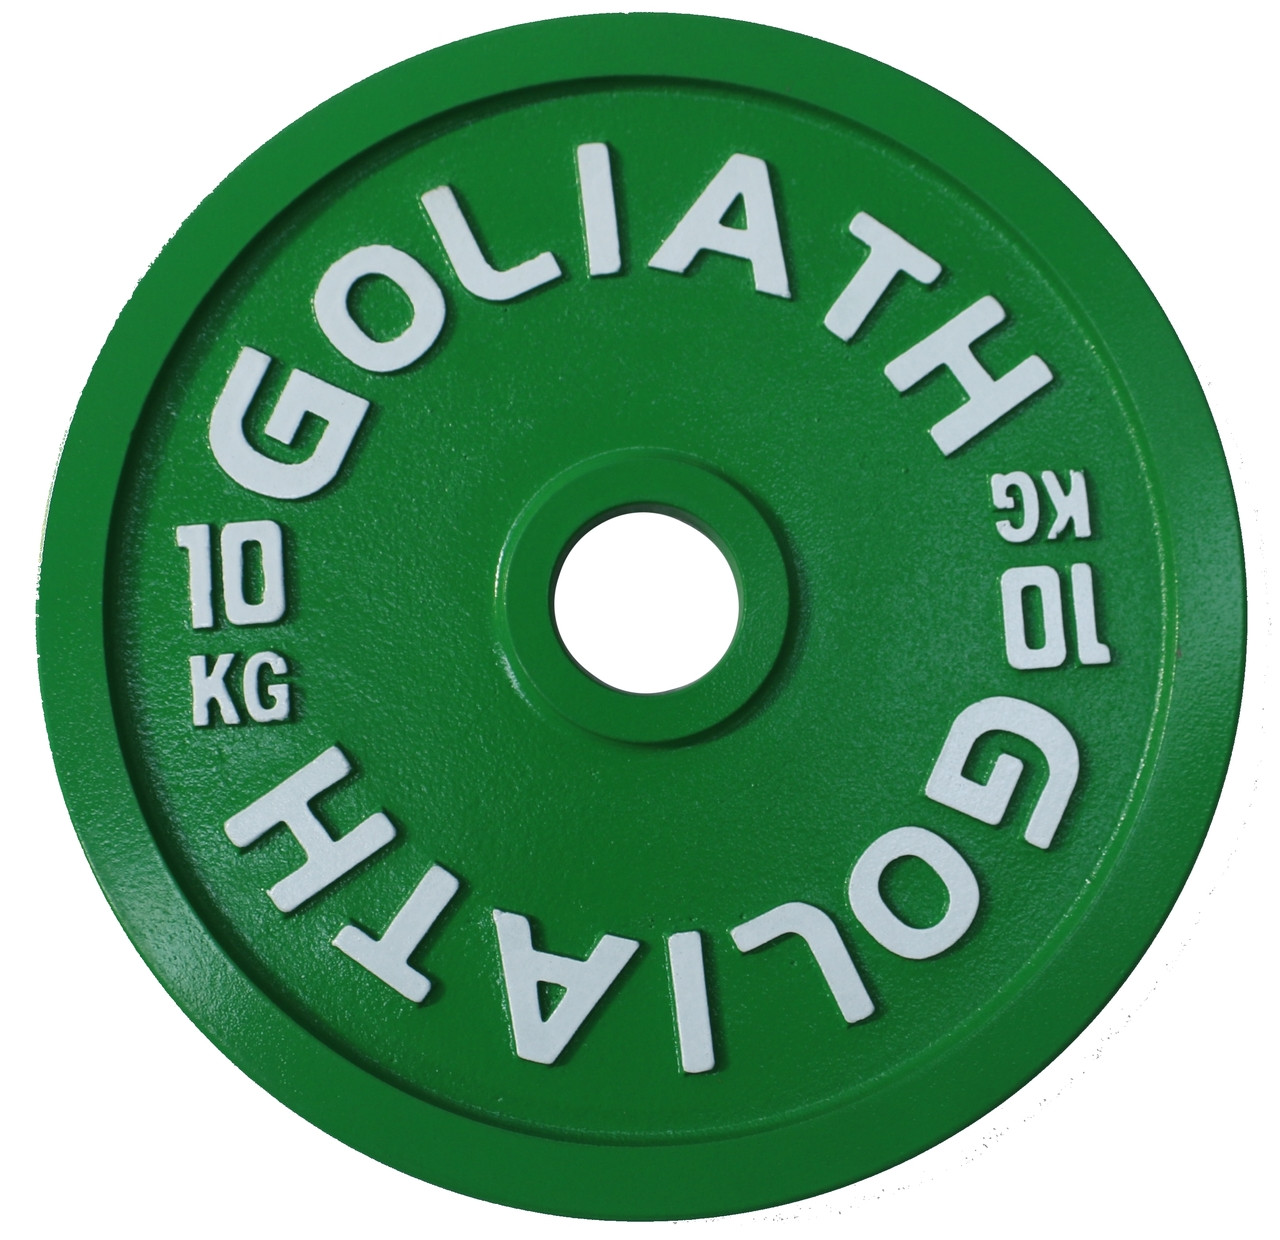 Goliath Barbell Calibrated Plates 459kg Set - BUY THE SET AND SAVE 